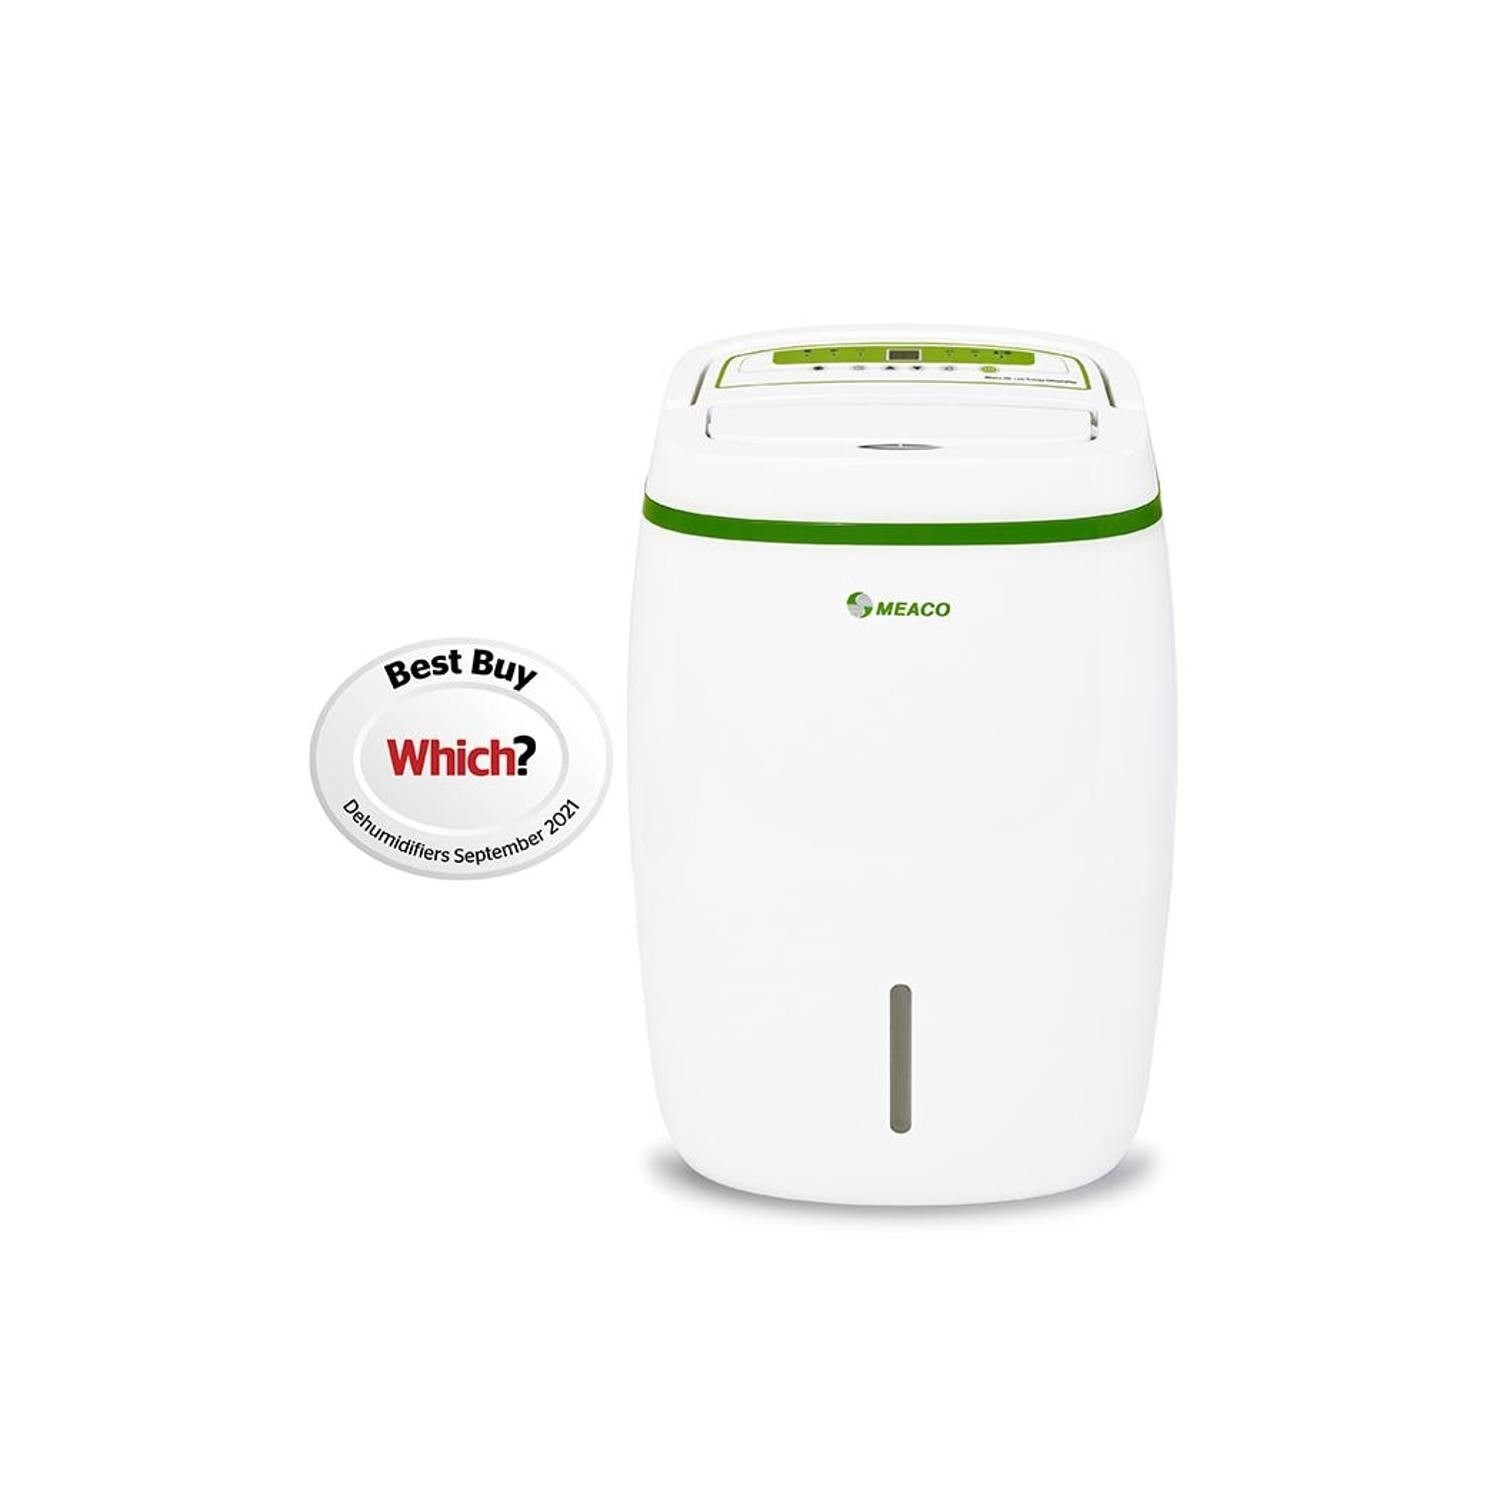 Meaco 20L Low Energy Dehumidifier and Air Purifier 2 in 1